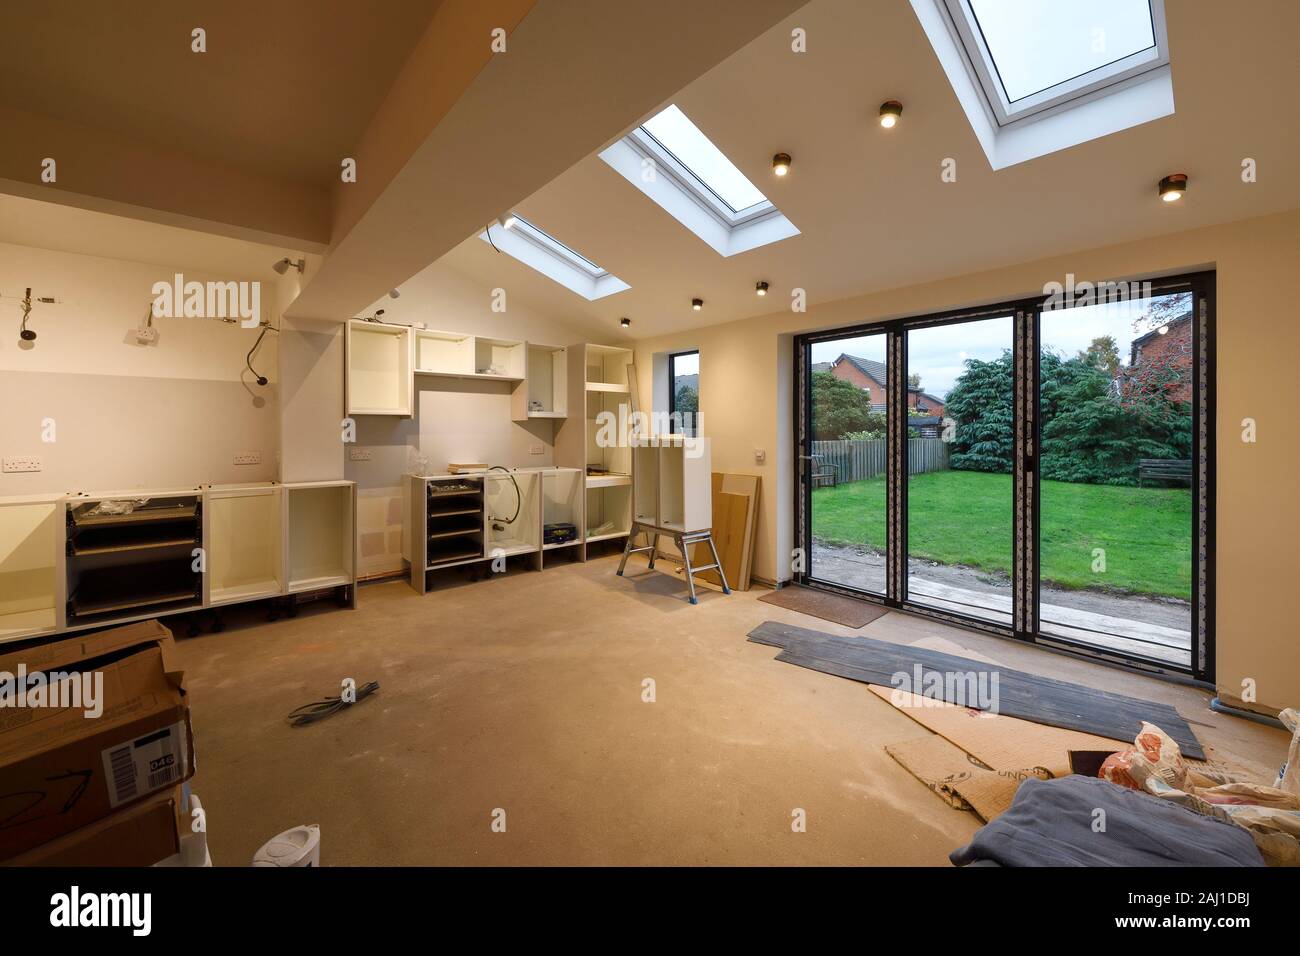 A new kitchen being fitted in a rear extension project at a house in Cheshire UK Stock Photo